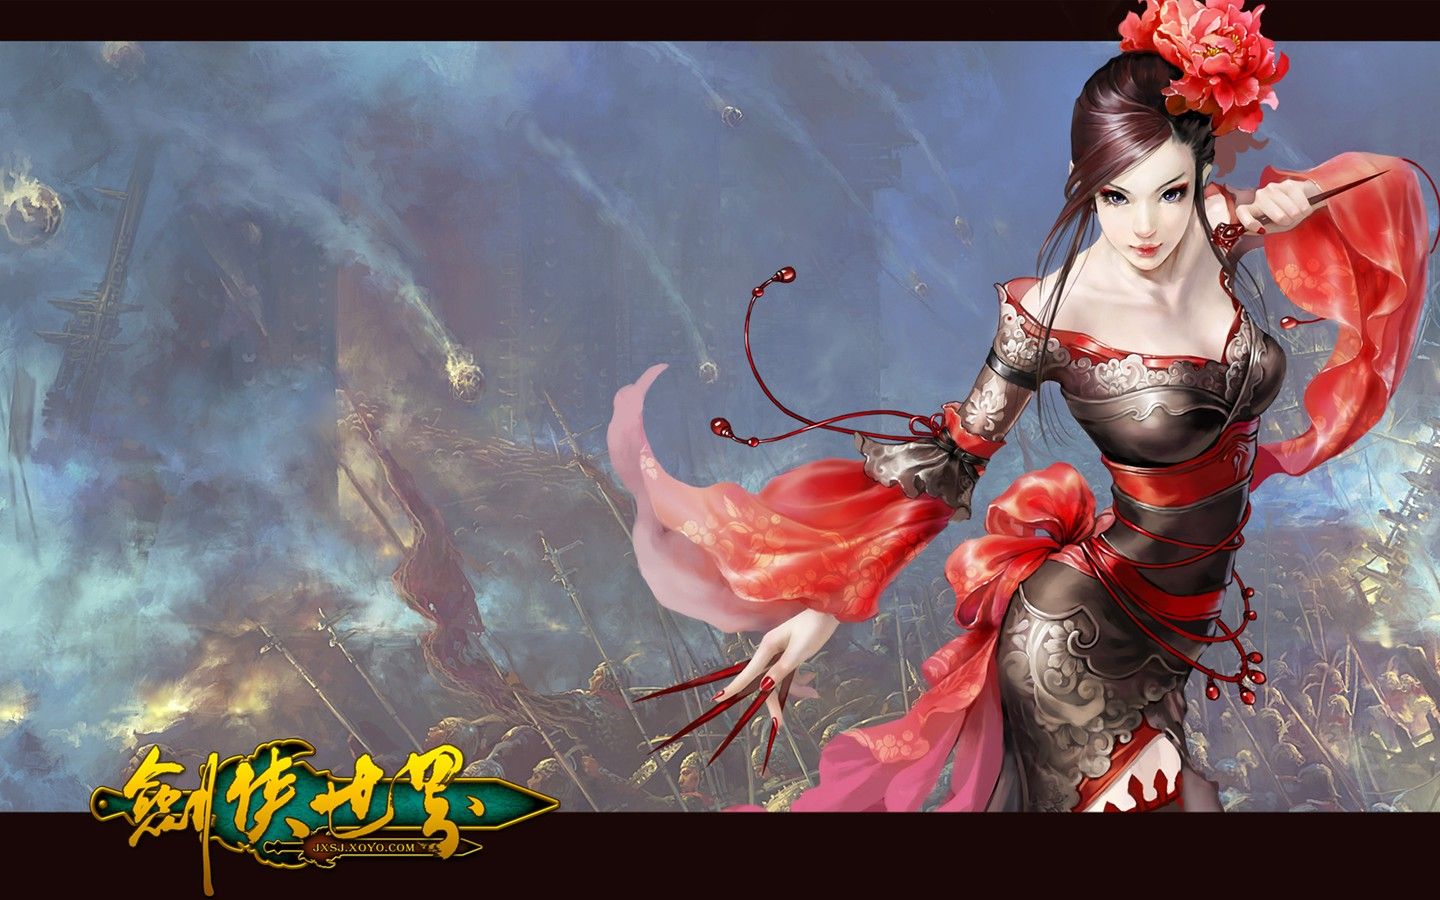 D of the swordsman in the world martial arts online game wallpaper 30246 / Games